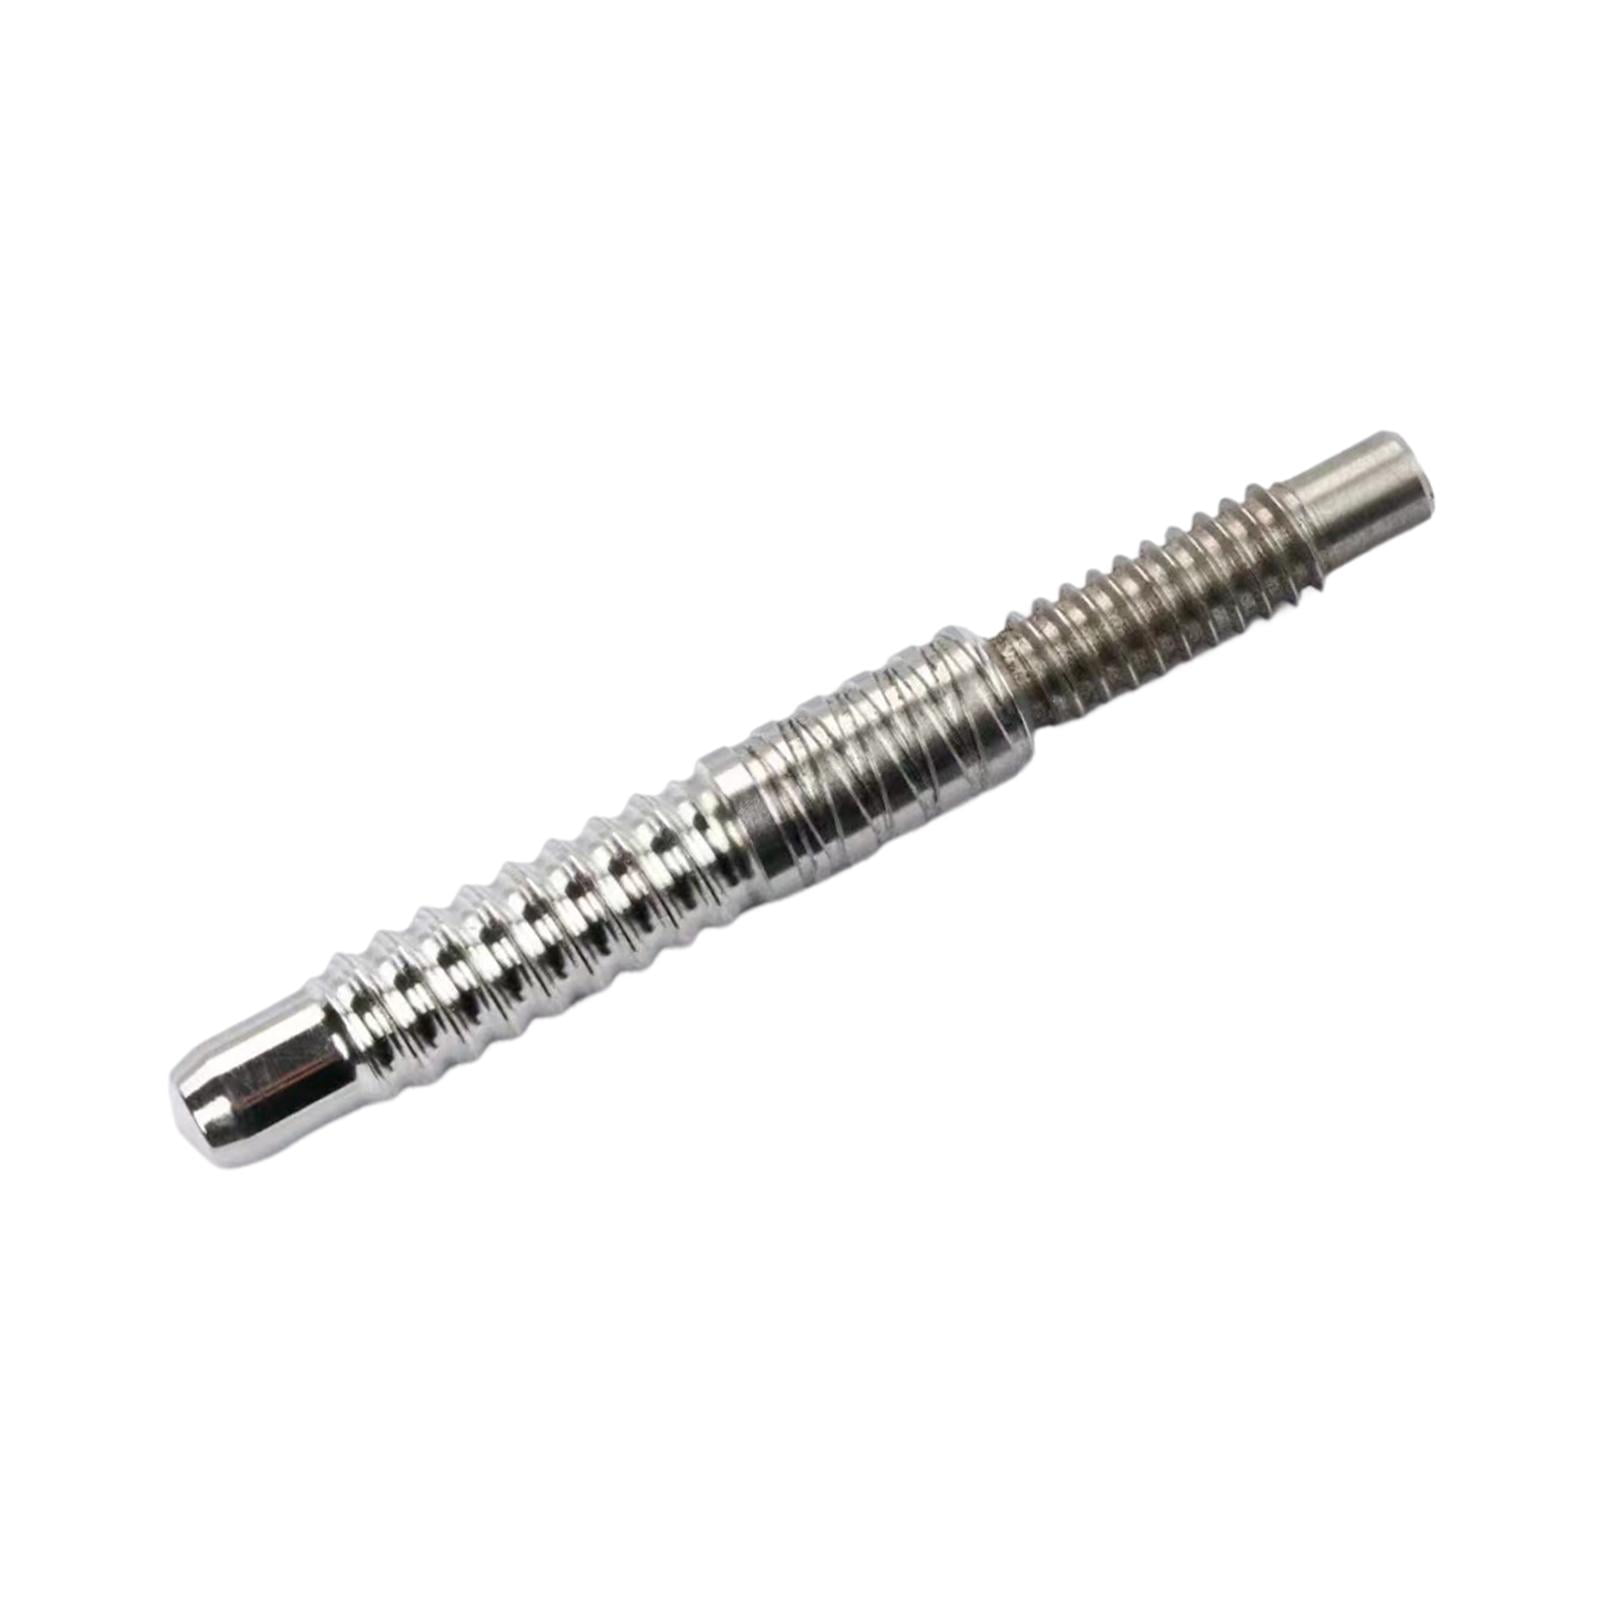 Billiards Pool Cue Joint Pin Insert Shaft Fittings Repair Supplies, Part  Accessory Durable Metal Pool Cue Joint Screws Billiards Accessories for 8  Radial Pin 